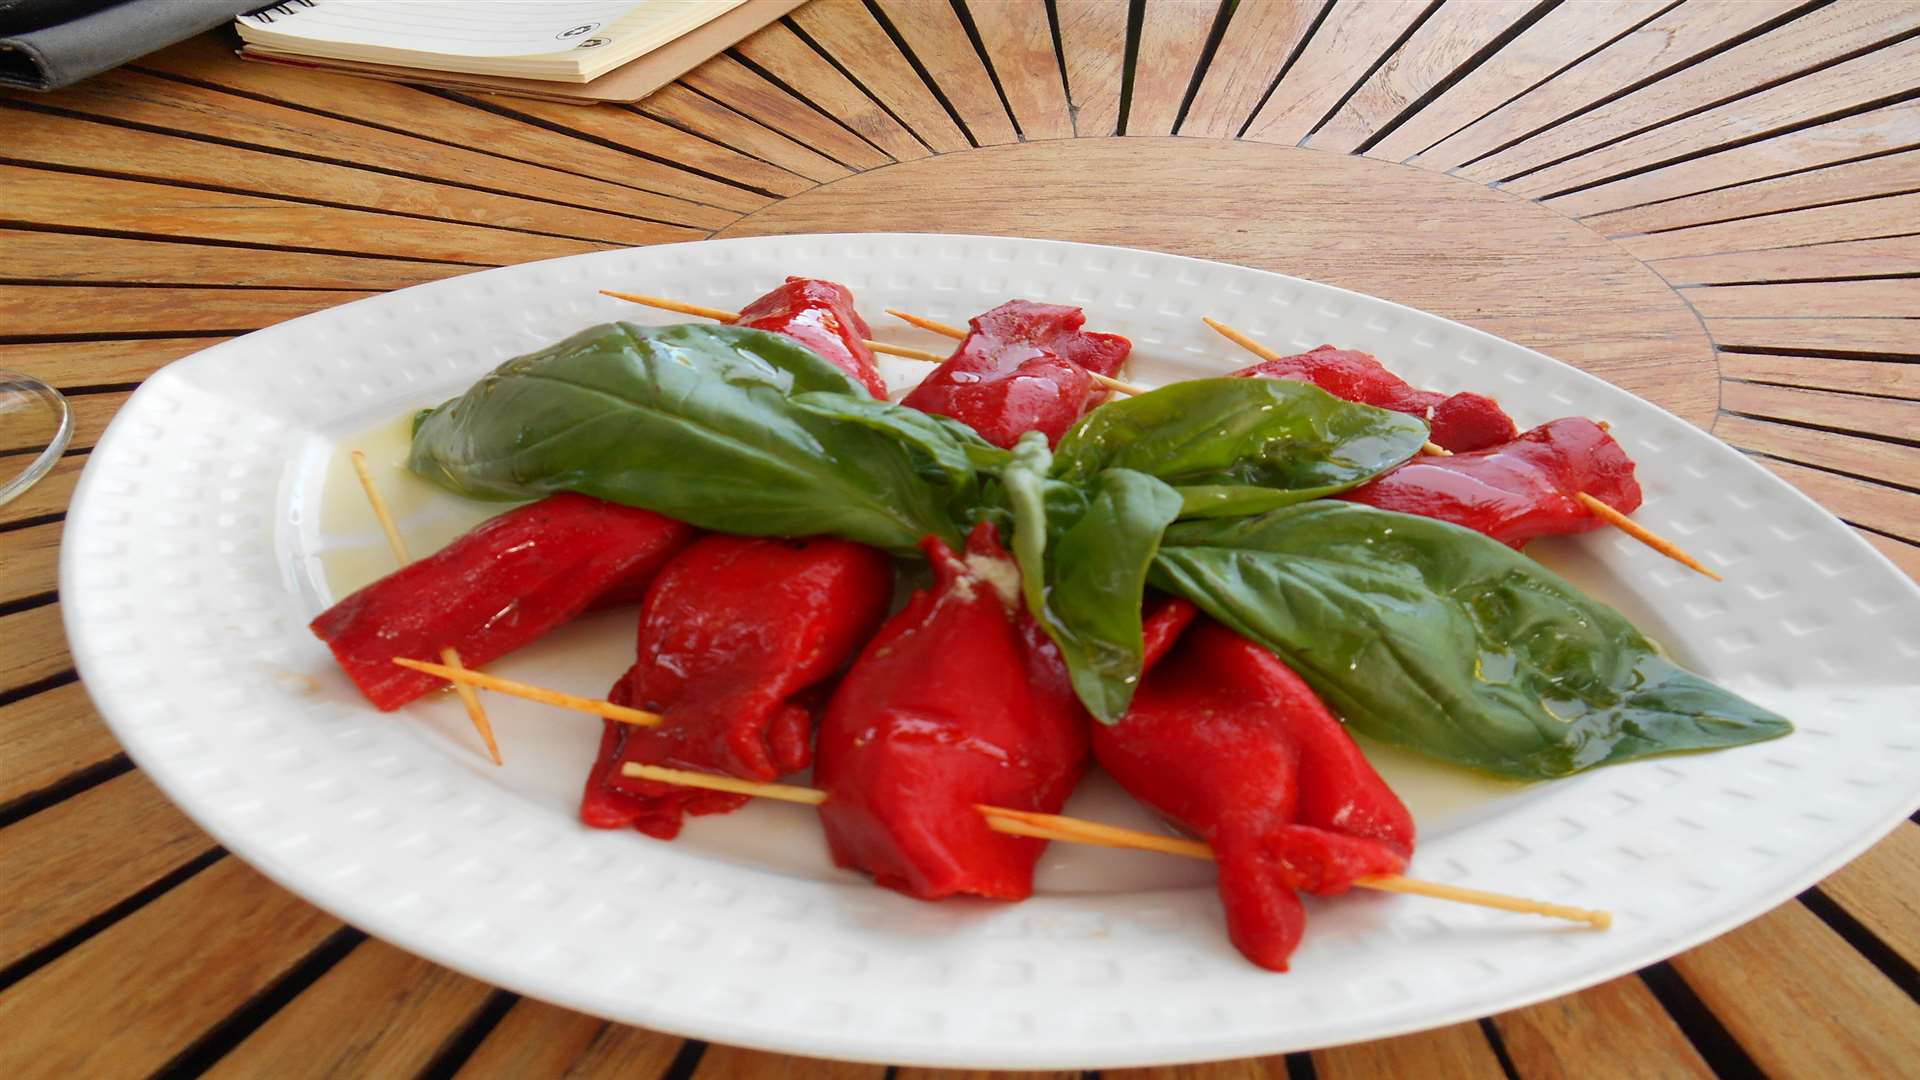 Simple, but probably one of the most memorable dishes of the trip: locally grown red peppers and basil smothered in olive oil served with a glass of locally-produced rosé wine